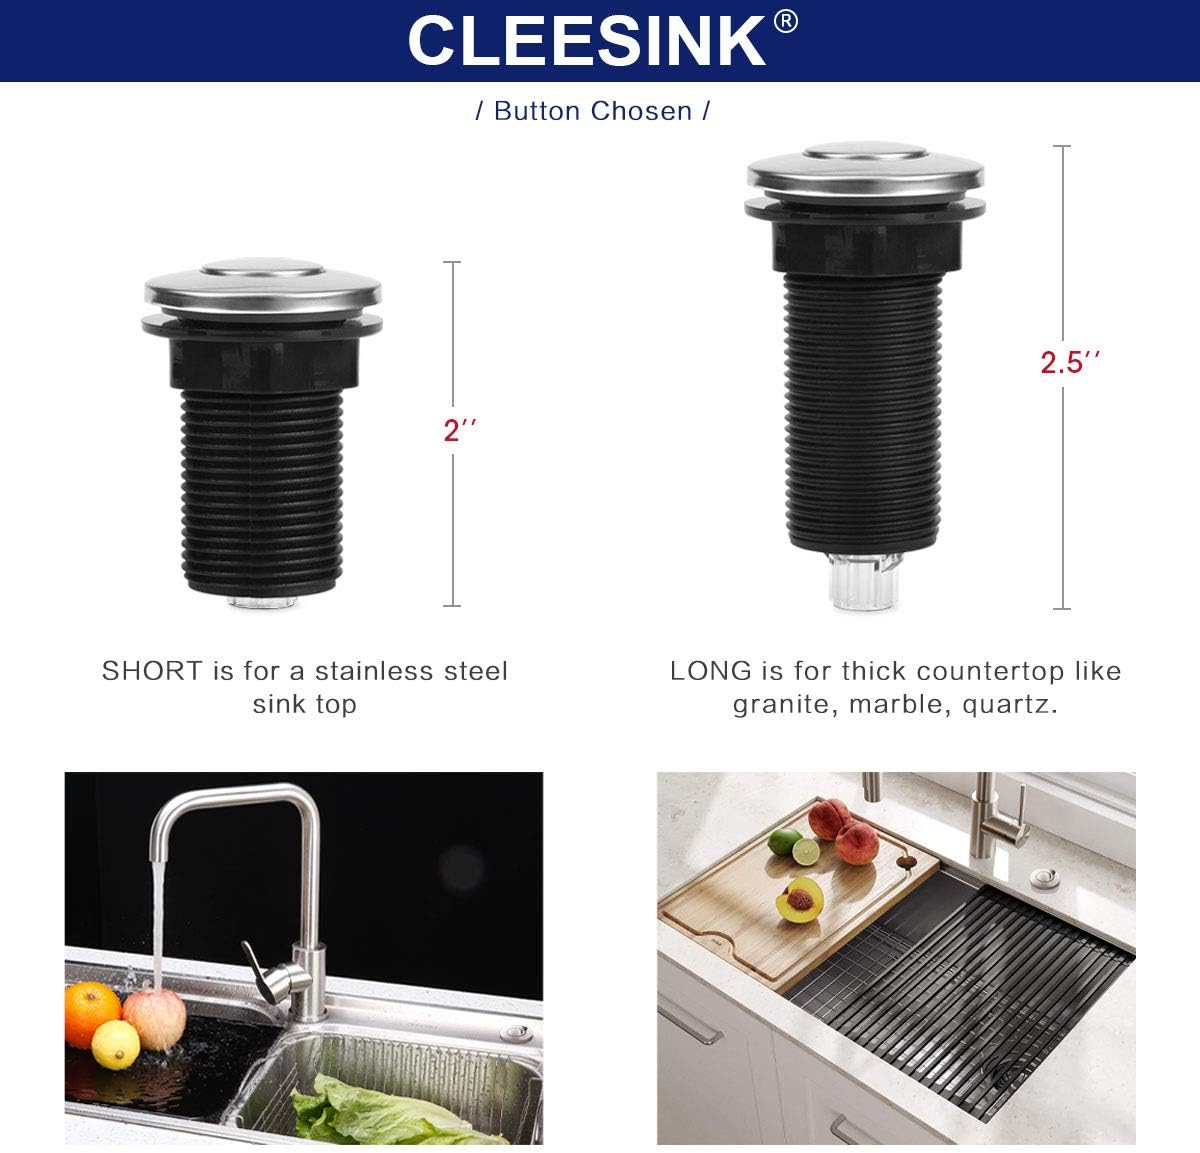 Cleesink Air Activated Switch Button with Air Hose, Sink Top Stainless Steel Brushed Push Button for Food Waste Garbage Disposal Part (L